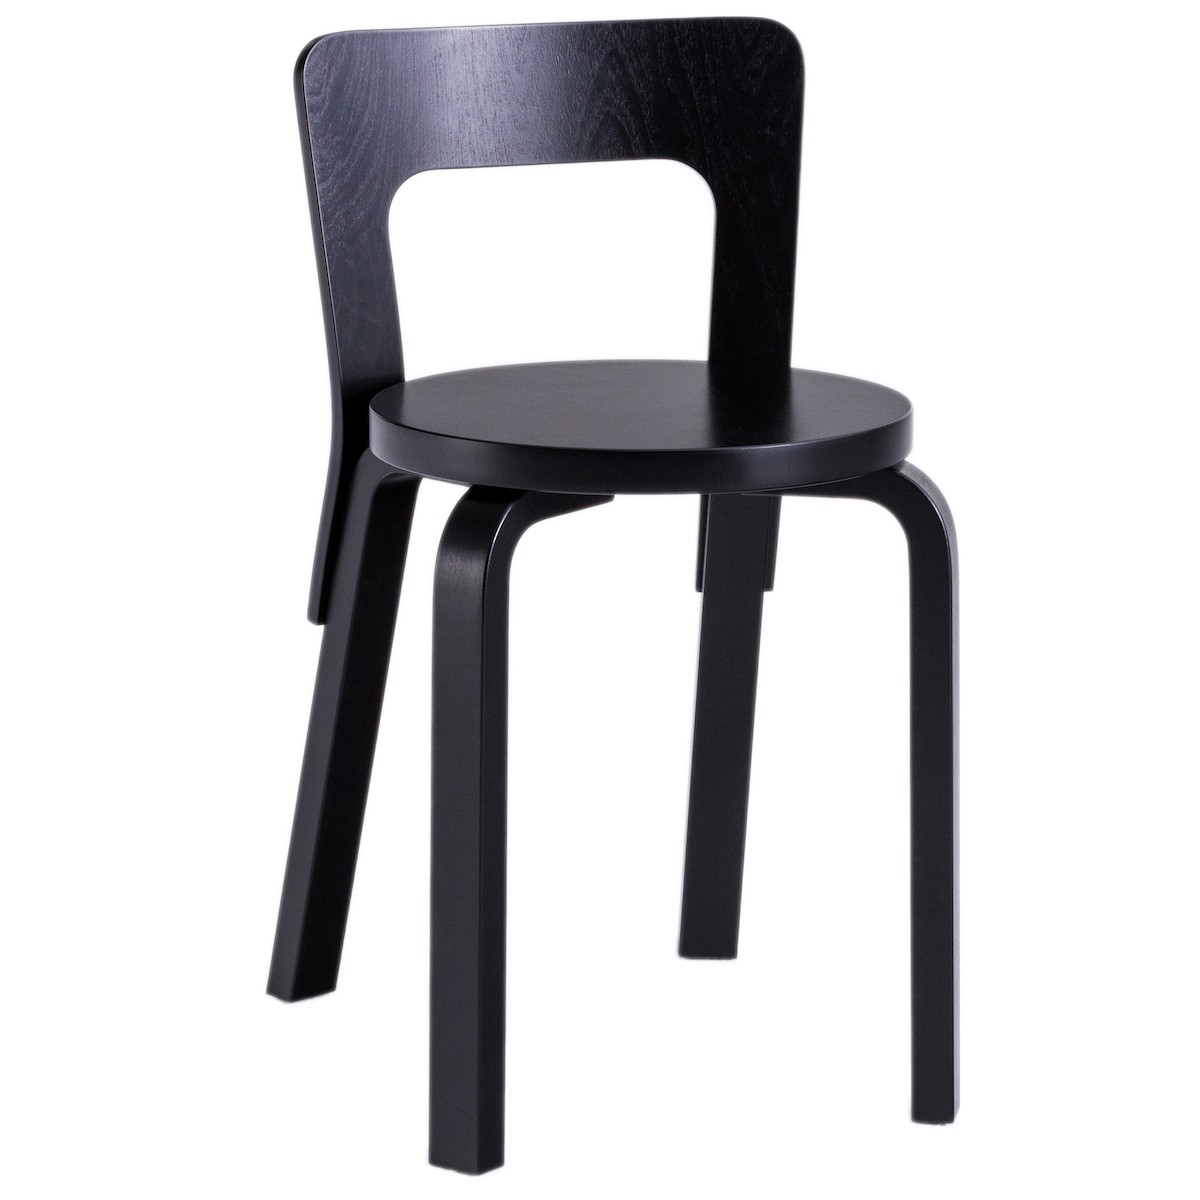 black lacquered birch - 65 chair